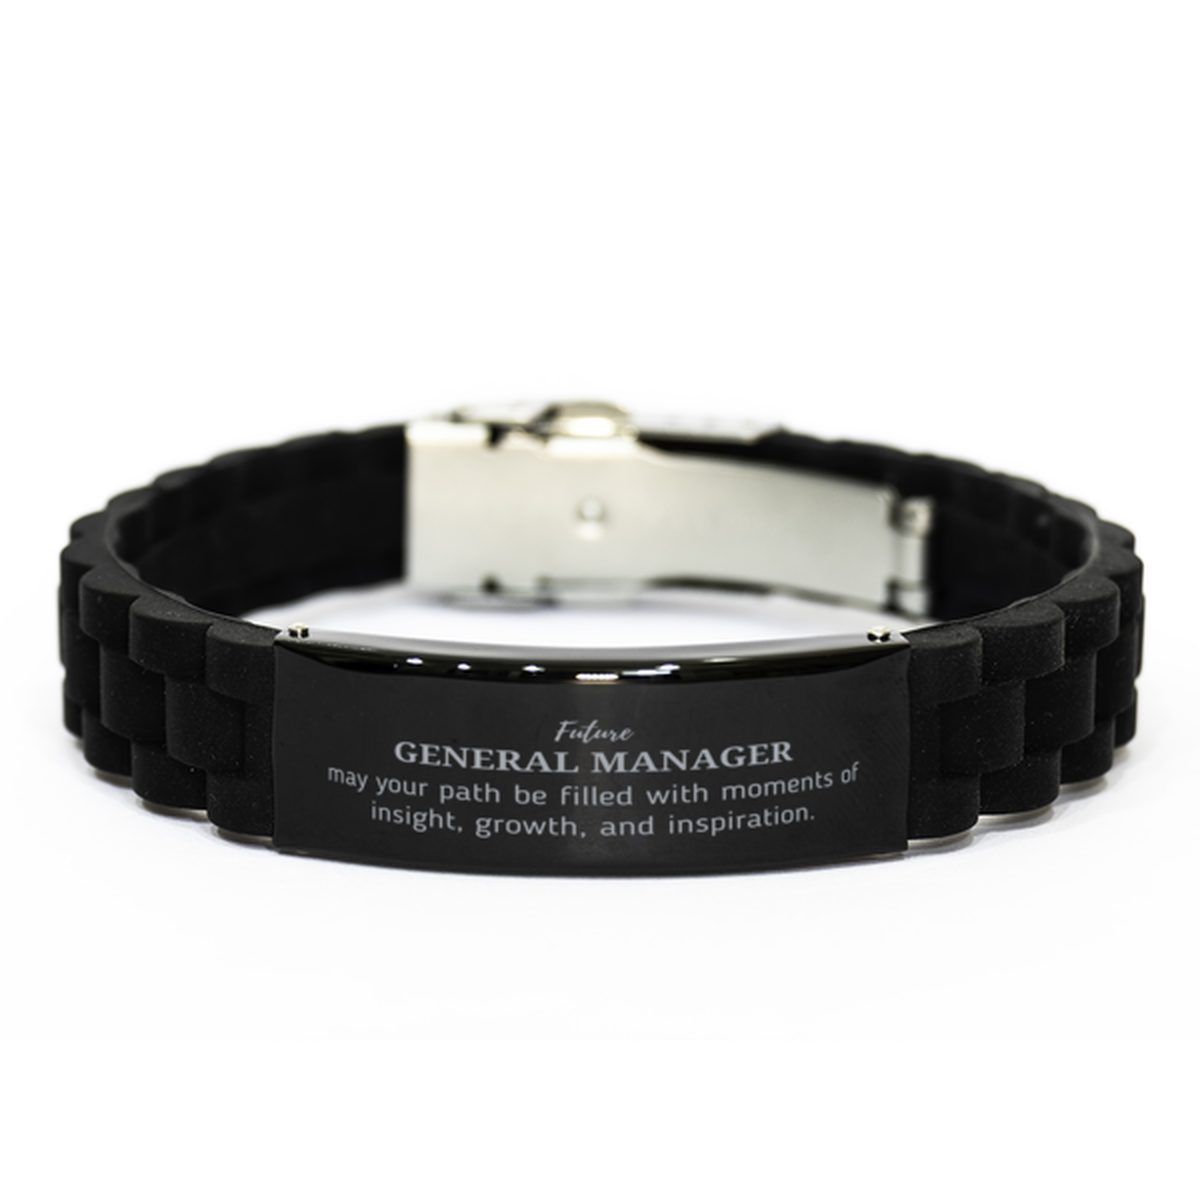 Future General Manager Gifts, May your path be filled with moments of insight, Graduation Gifts for New General Manager, Christmas Unique Black Glidelock Clasp Bracelet For Men, Women, Friends